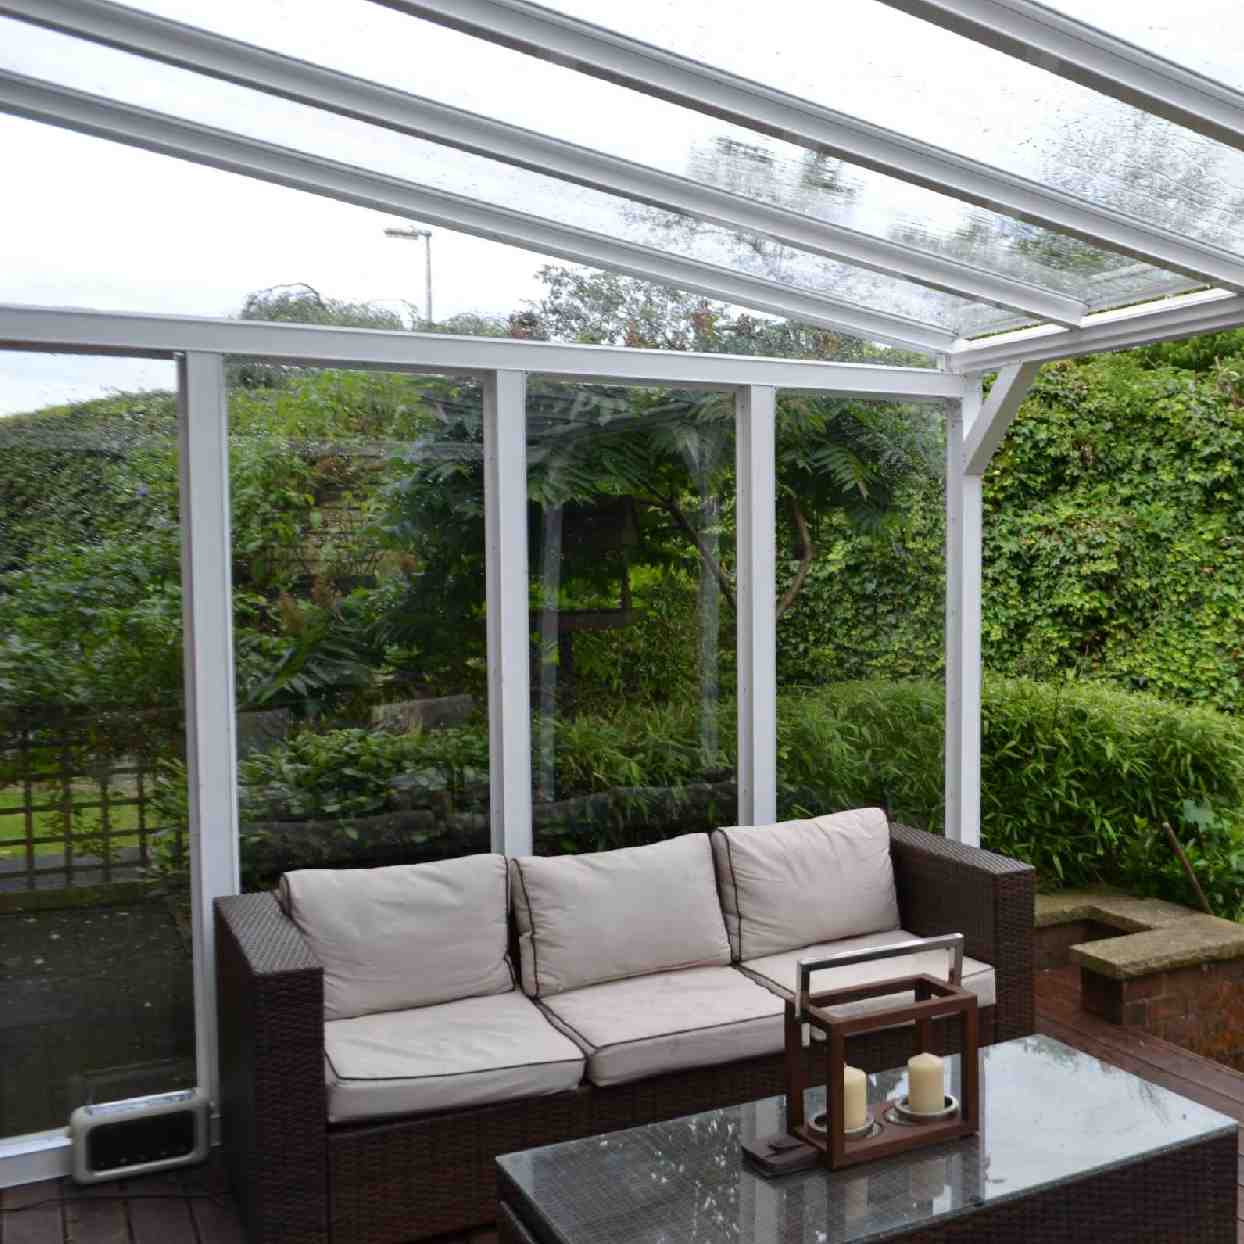 Buy Omega Verandah White with 6mm Glass Clear Plate Polycarbonate Glazing - 3.5m (W) x 3.5m (P), (3) Supporting Posts online today